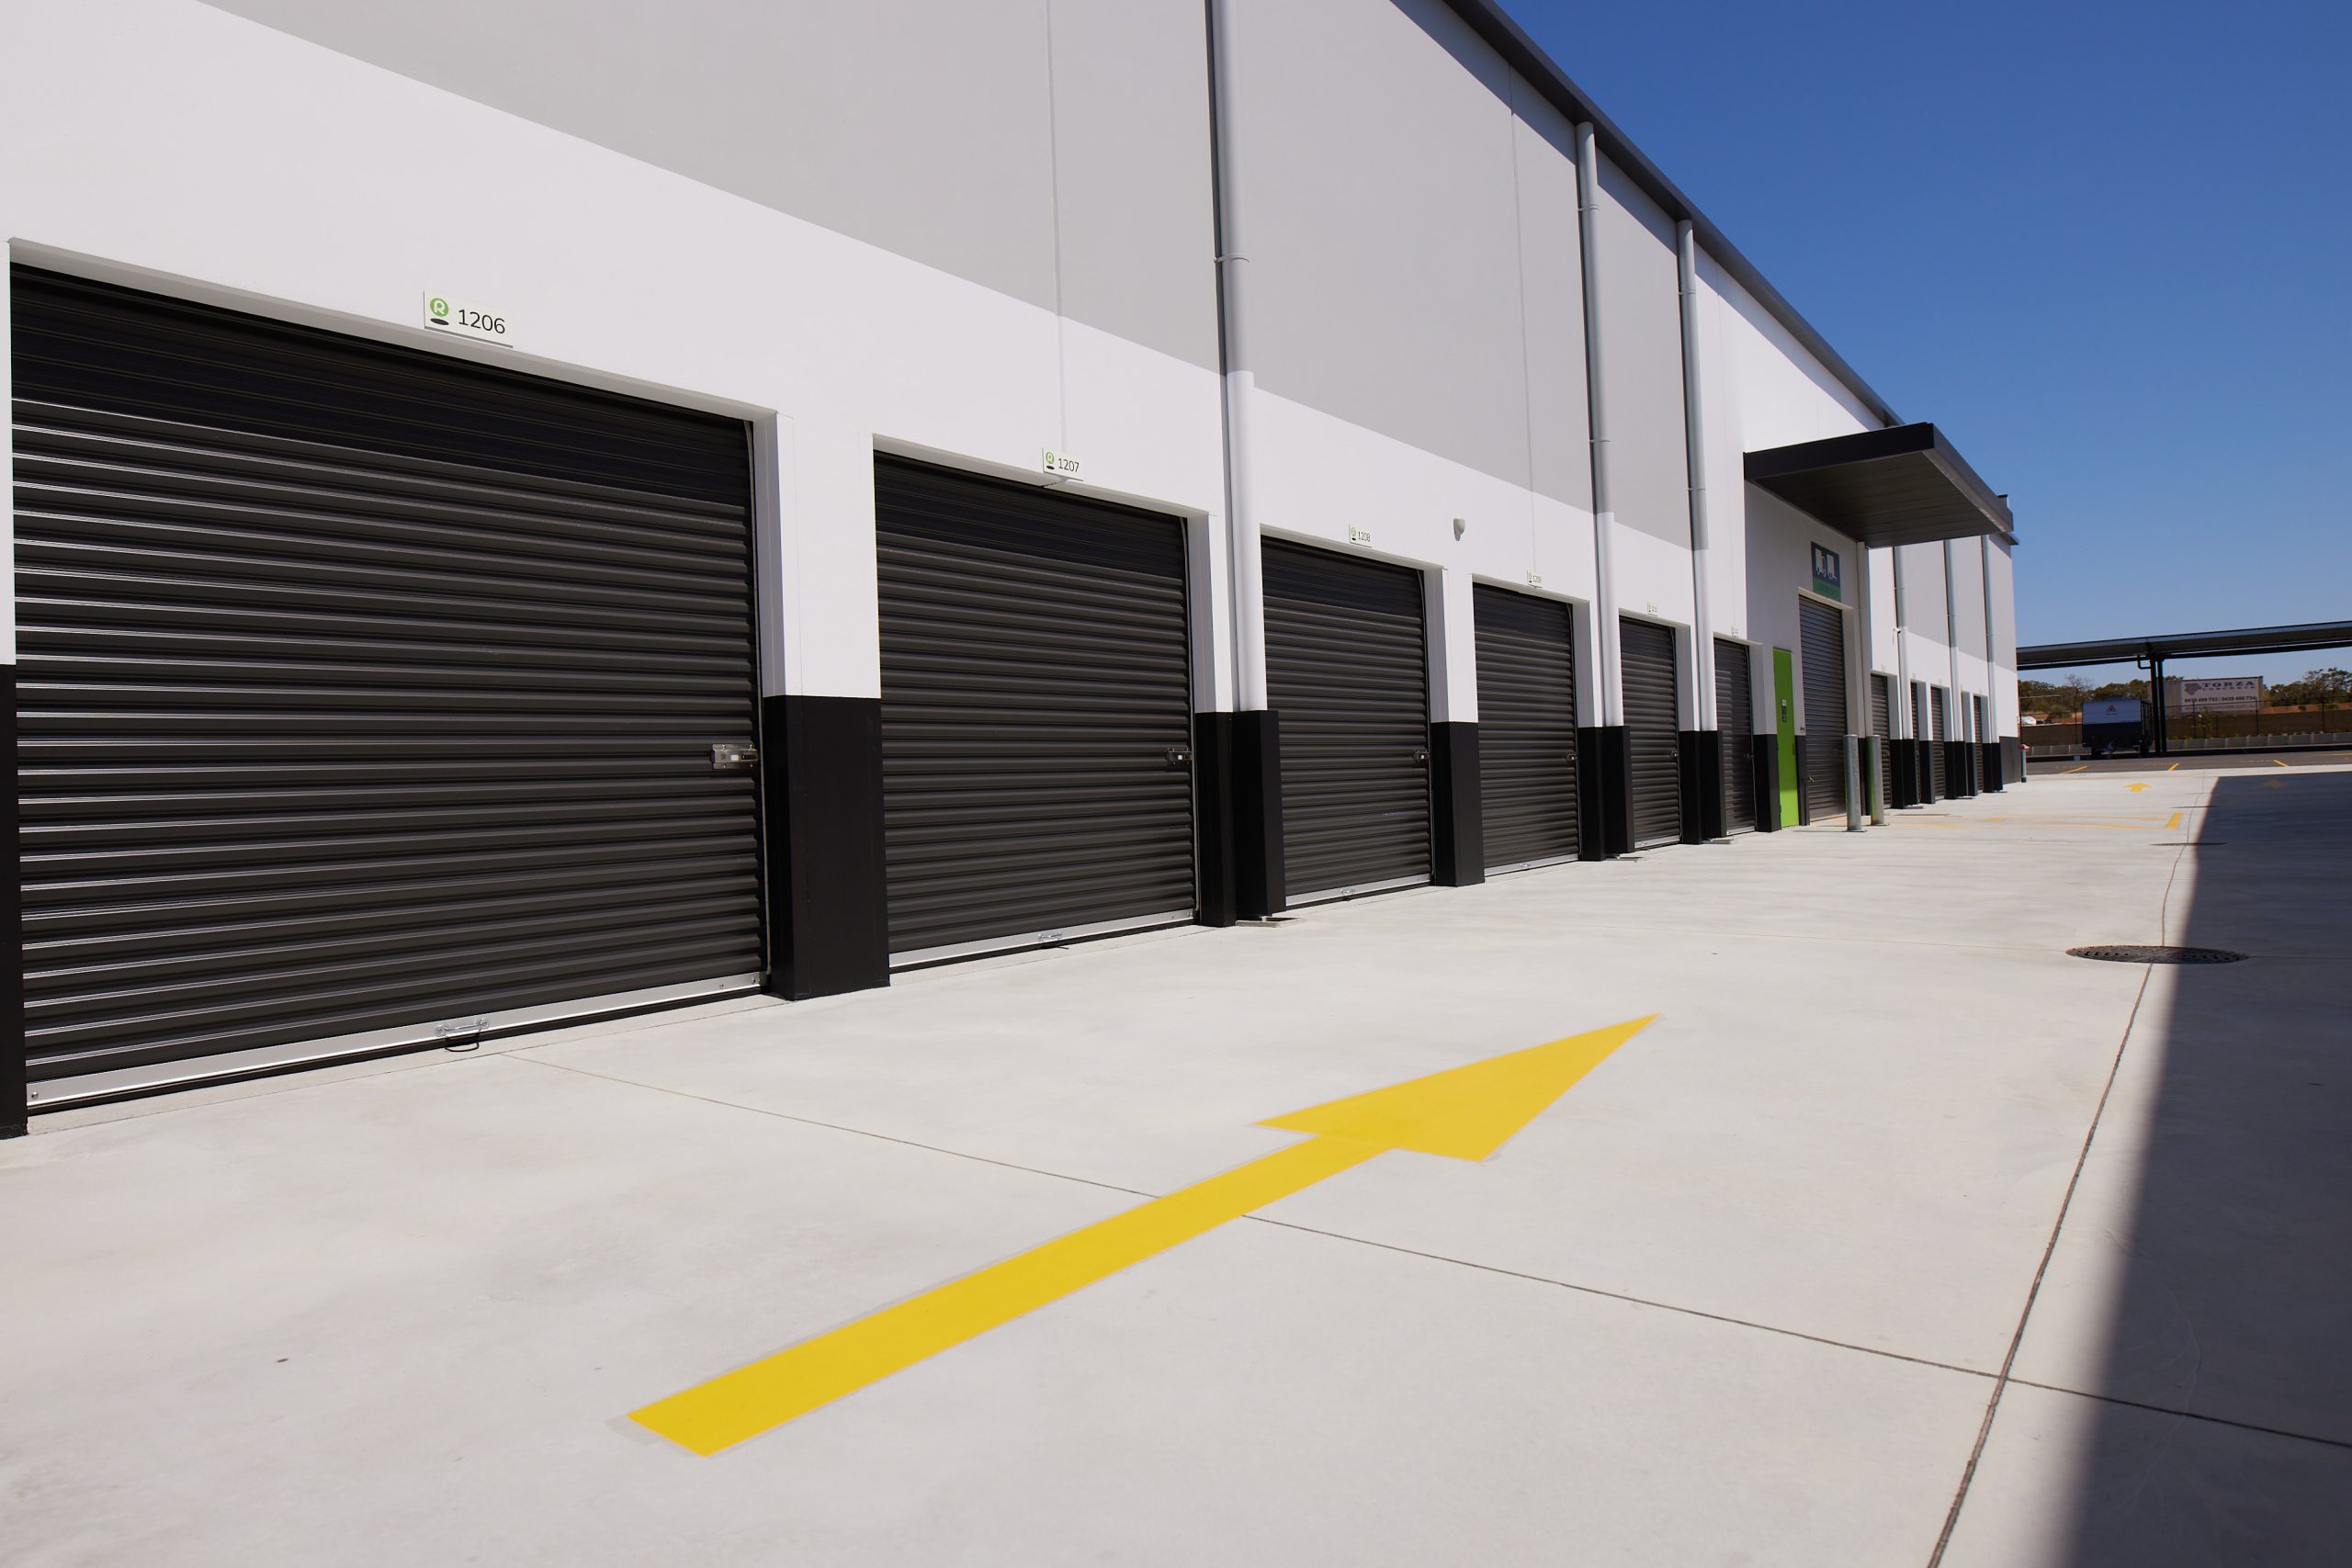 drive up units with wide driveways